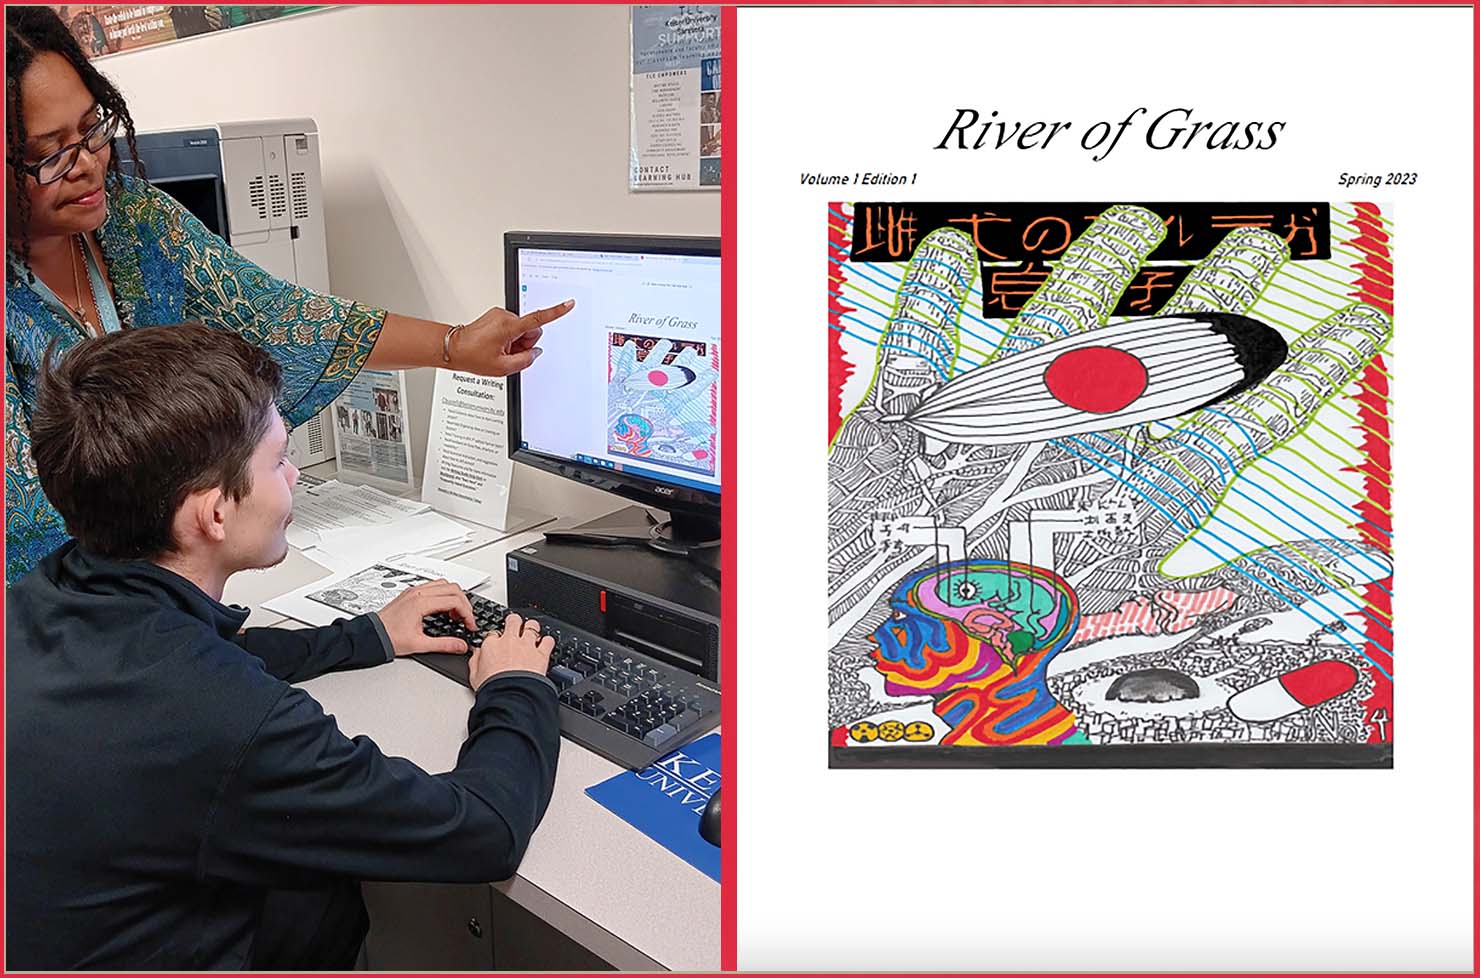 Keiser University River of Grass Publication Features Original Works from the Keiser Community